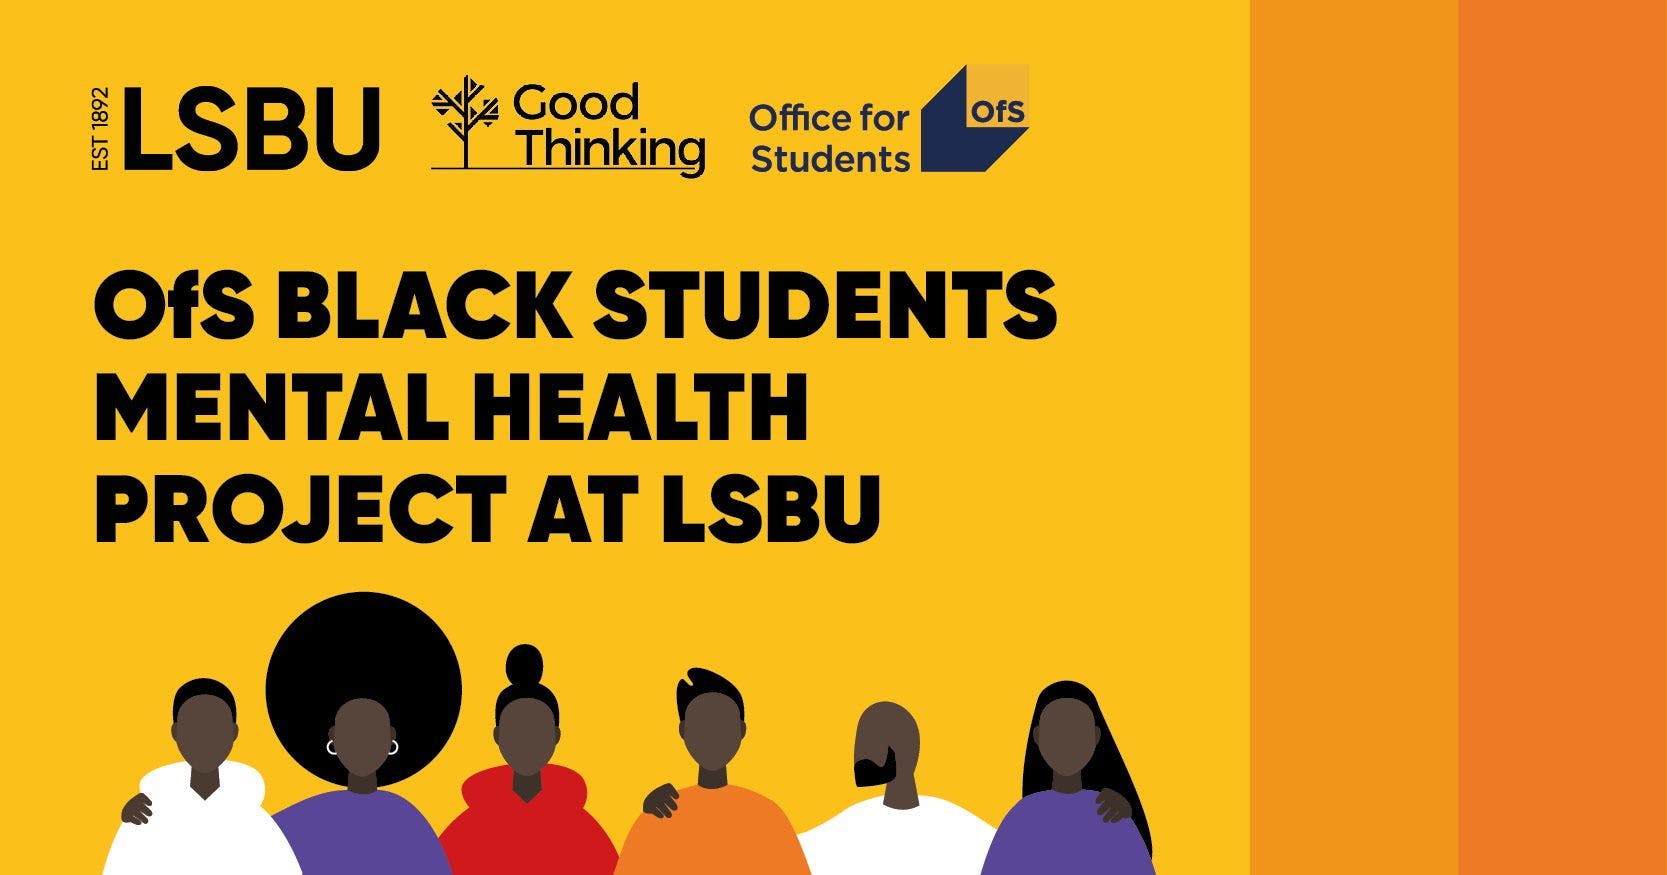 Title graphic for the OfS Black Students Mental Health Project. The title of the project is written above a graphic of a group of black students. The OfS, LSBU and Good Thinking logos are displayed